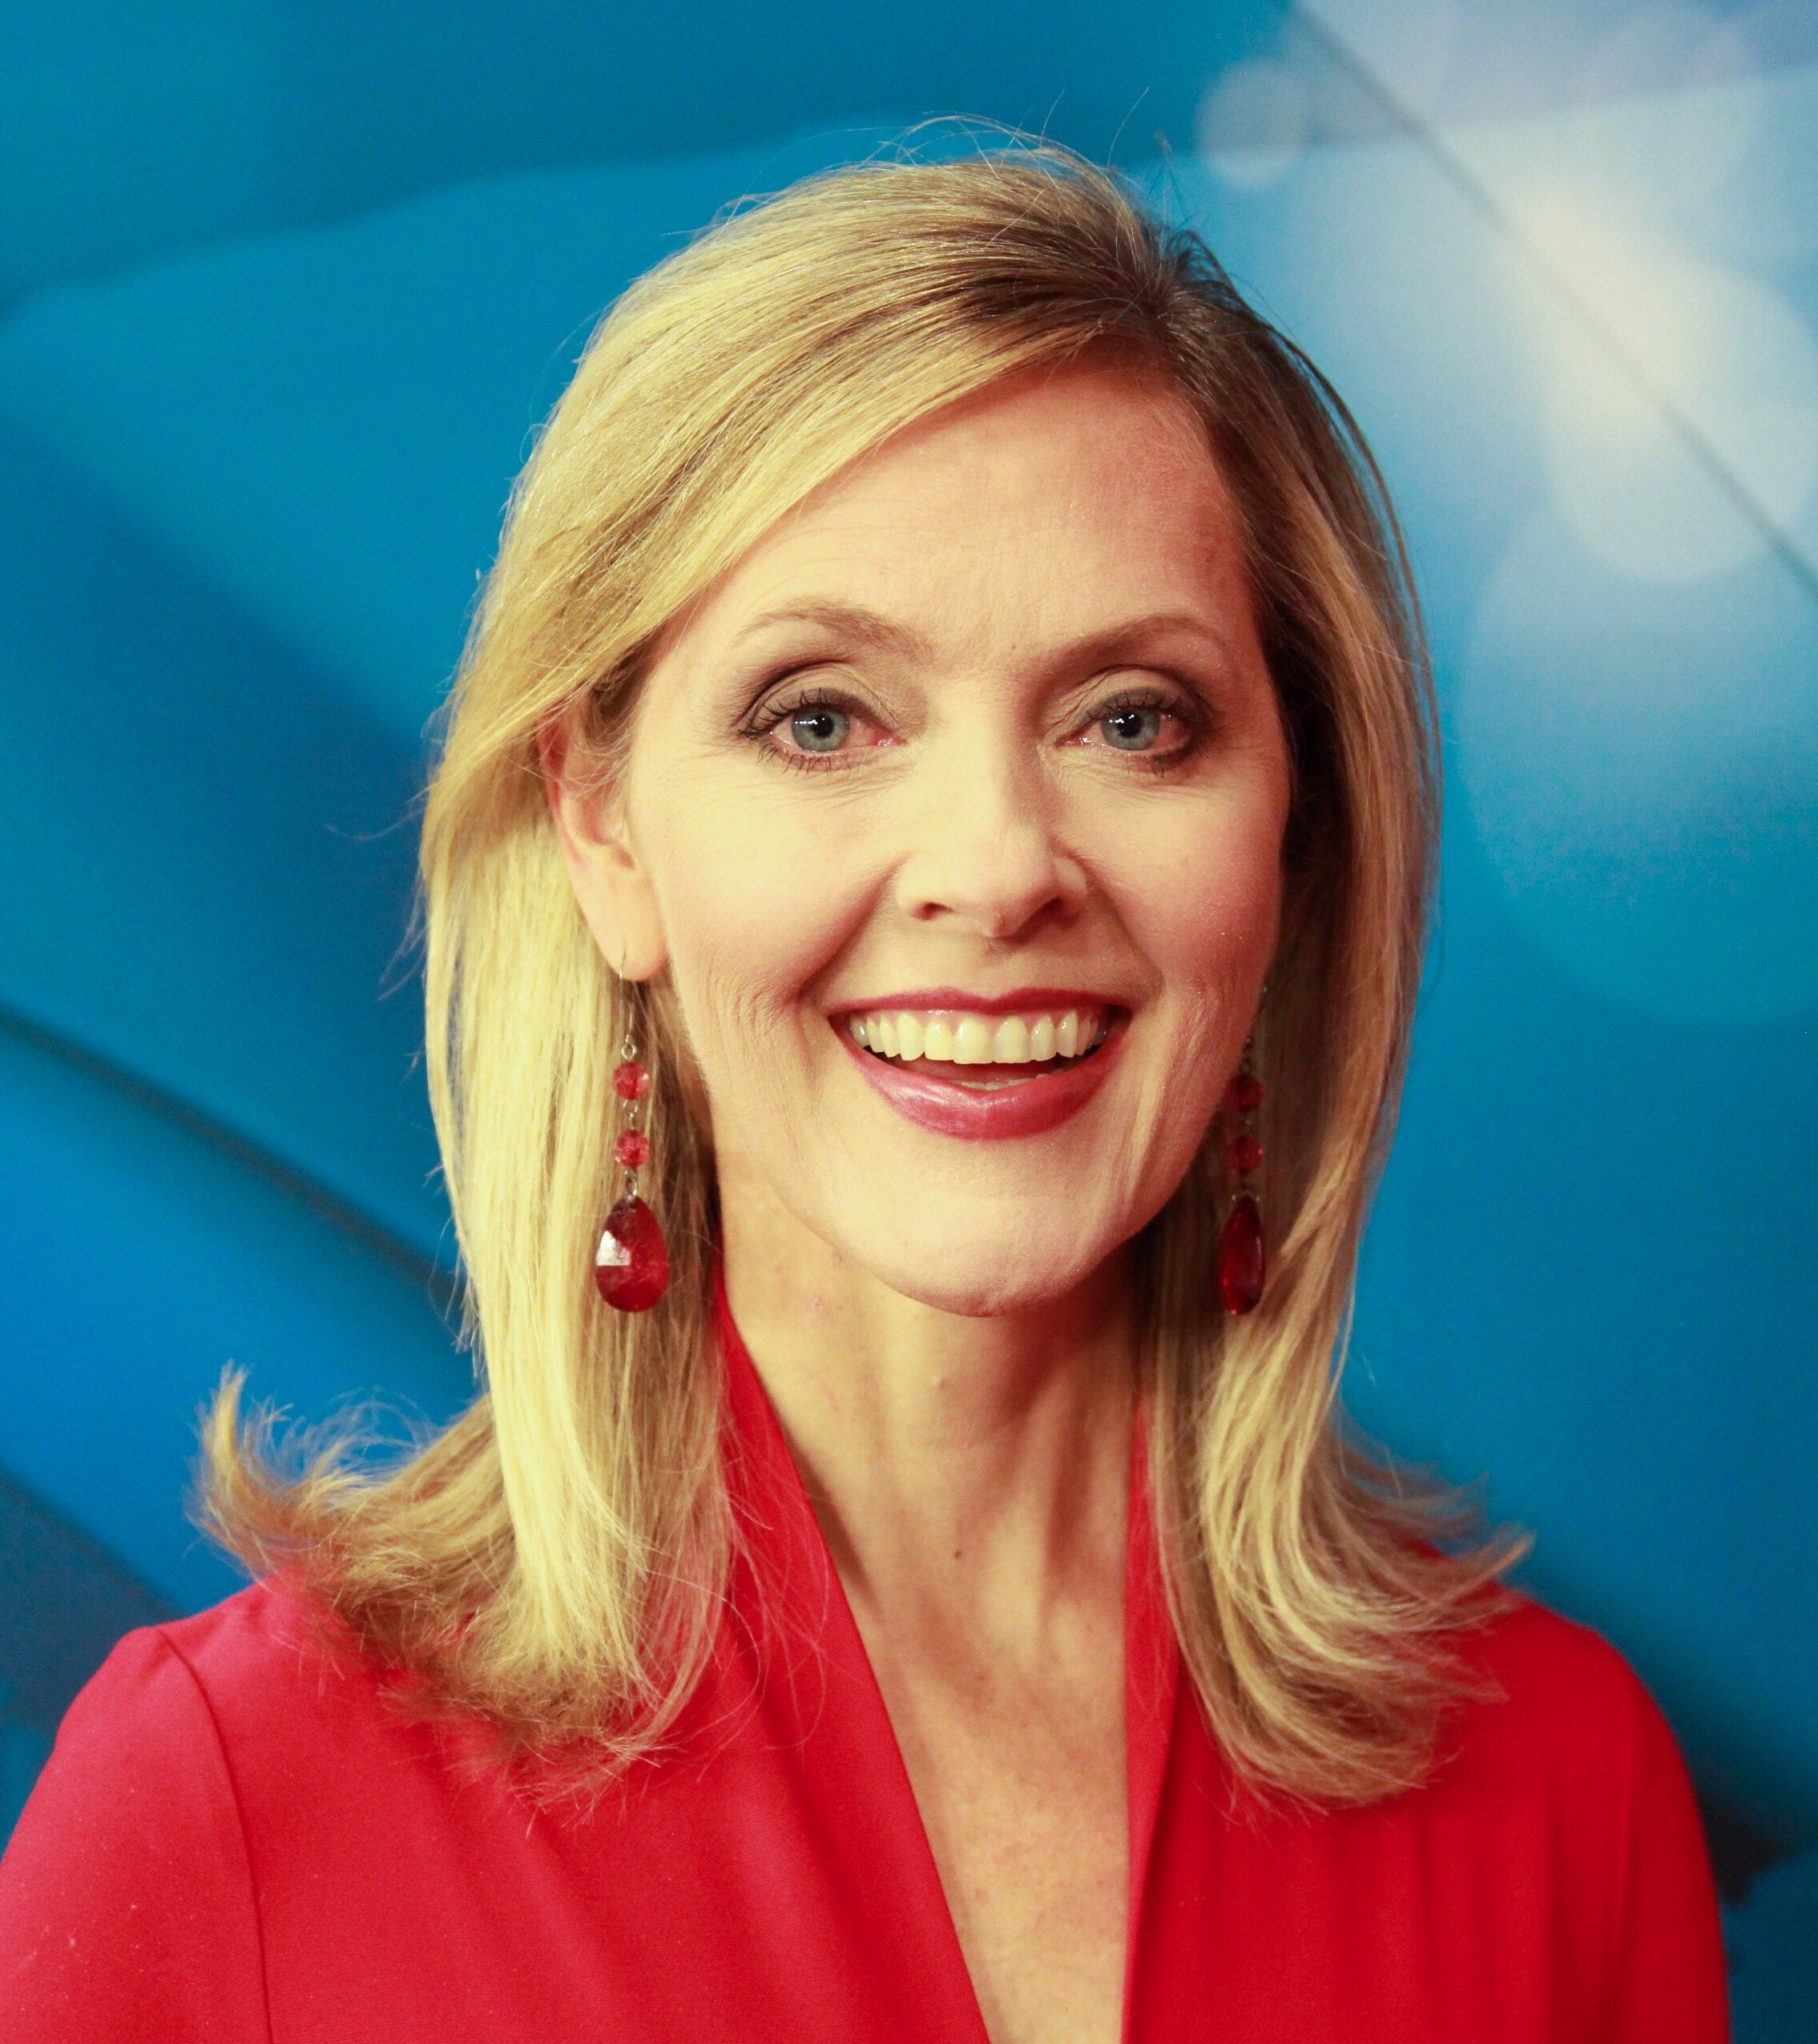 Assistant News Director/Noon Anchor at WABI TV5. #wife #twinmom #journalist Links & RTs ≠ endorsements. Opinions are my own. Connect with me at cpegram@wabi.tv